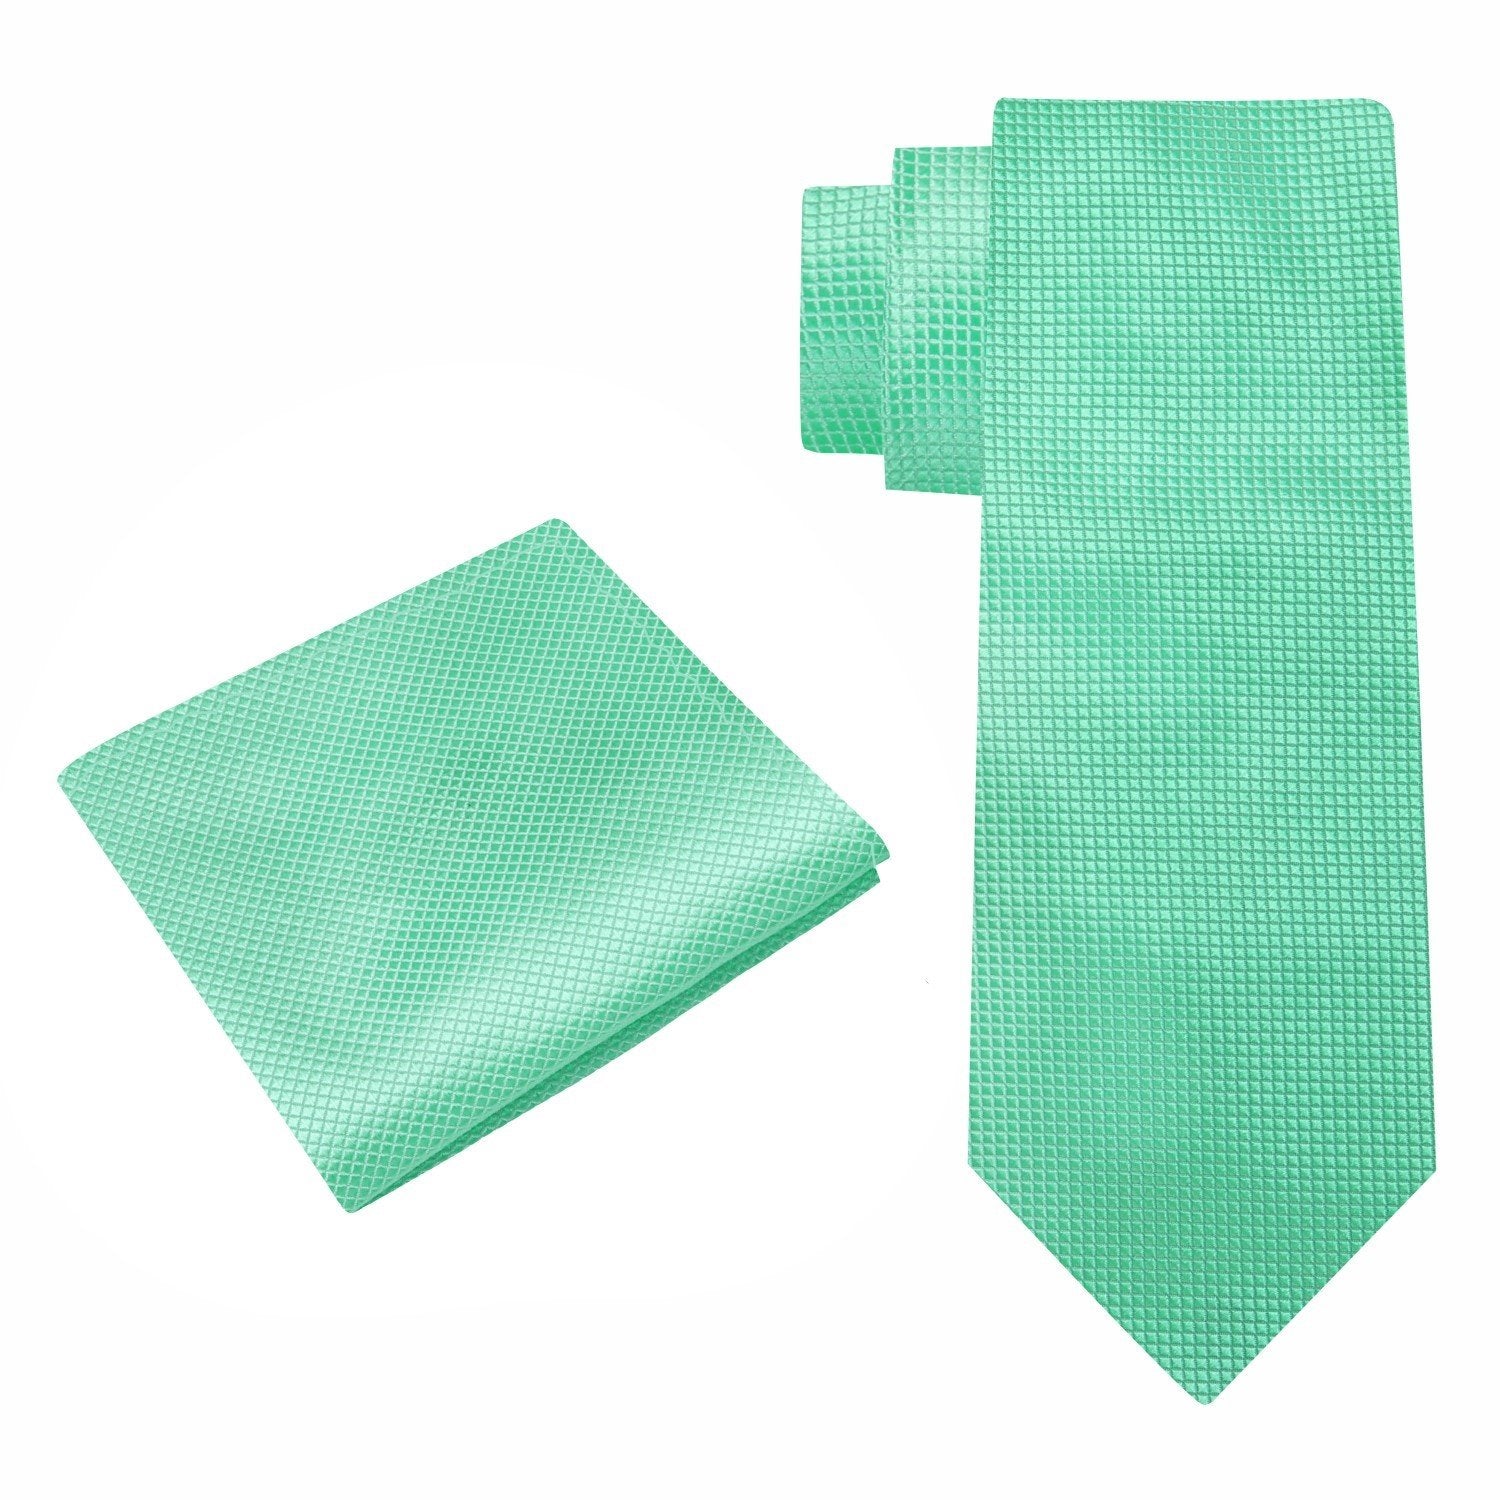 Alt View: A Solid Mint With Check Texture Pattern Silk Necktie, Matching Pocket Square